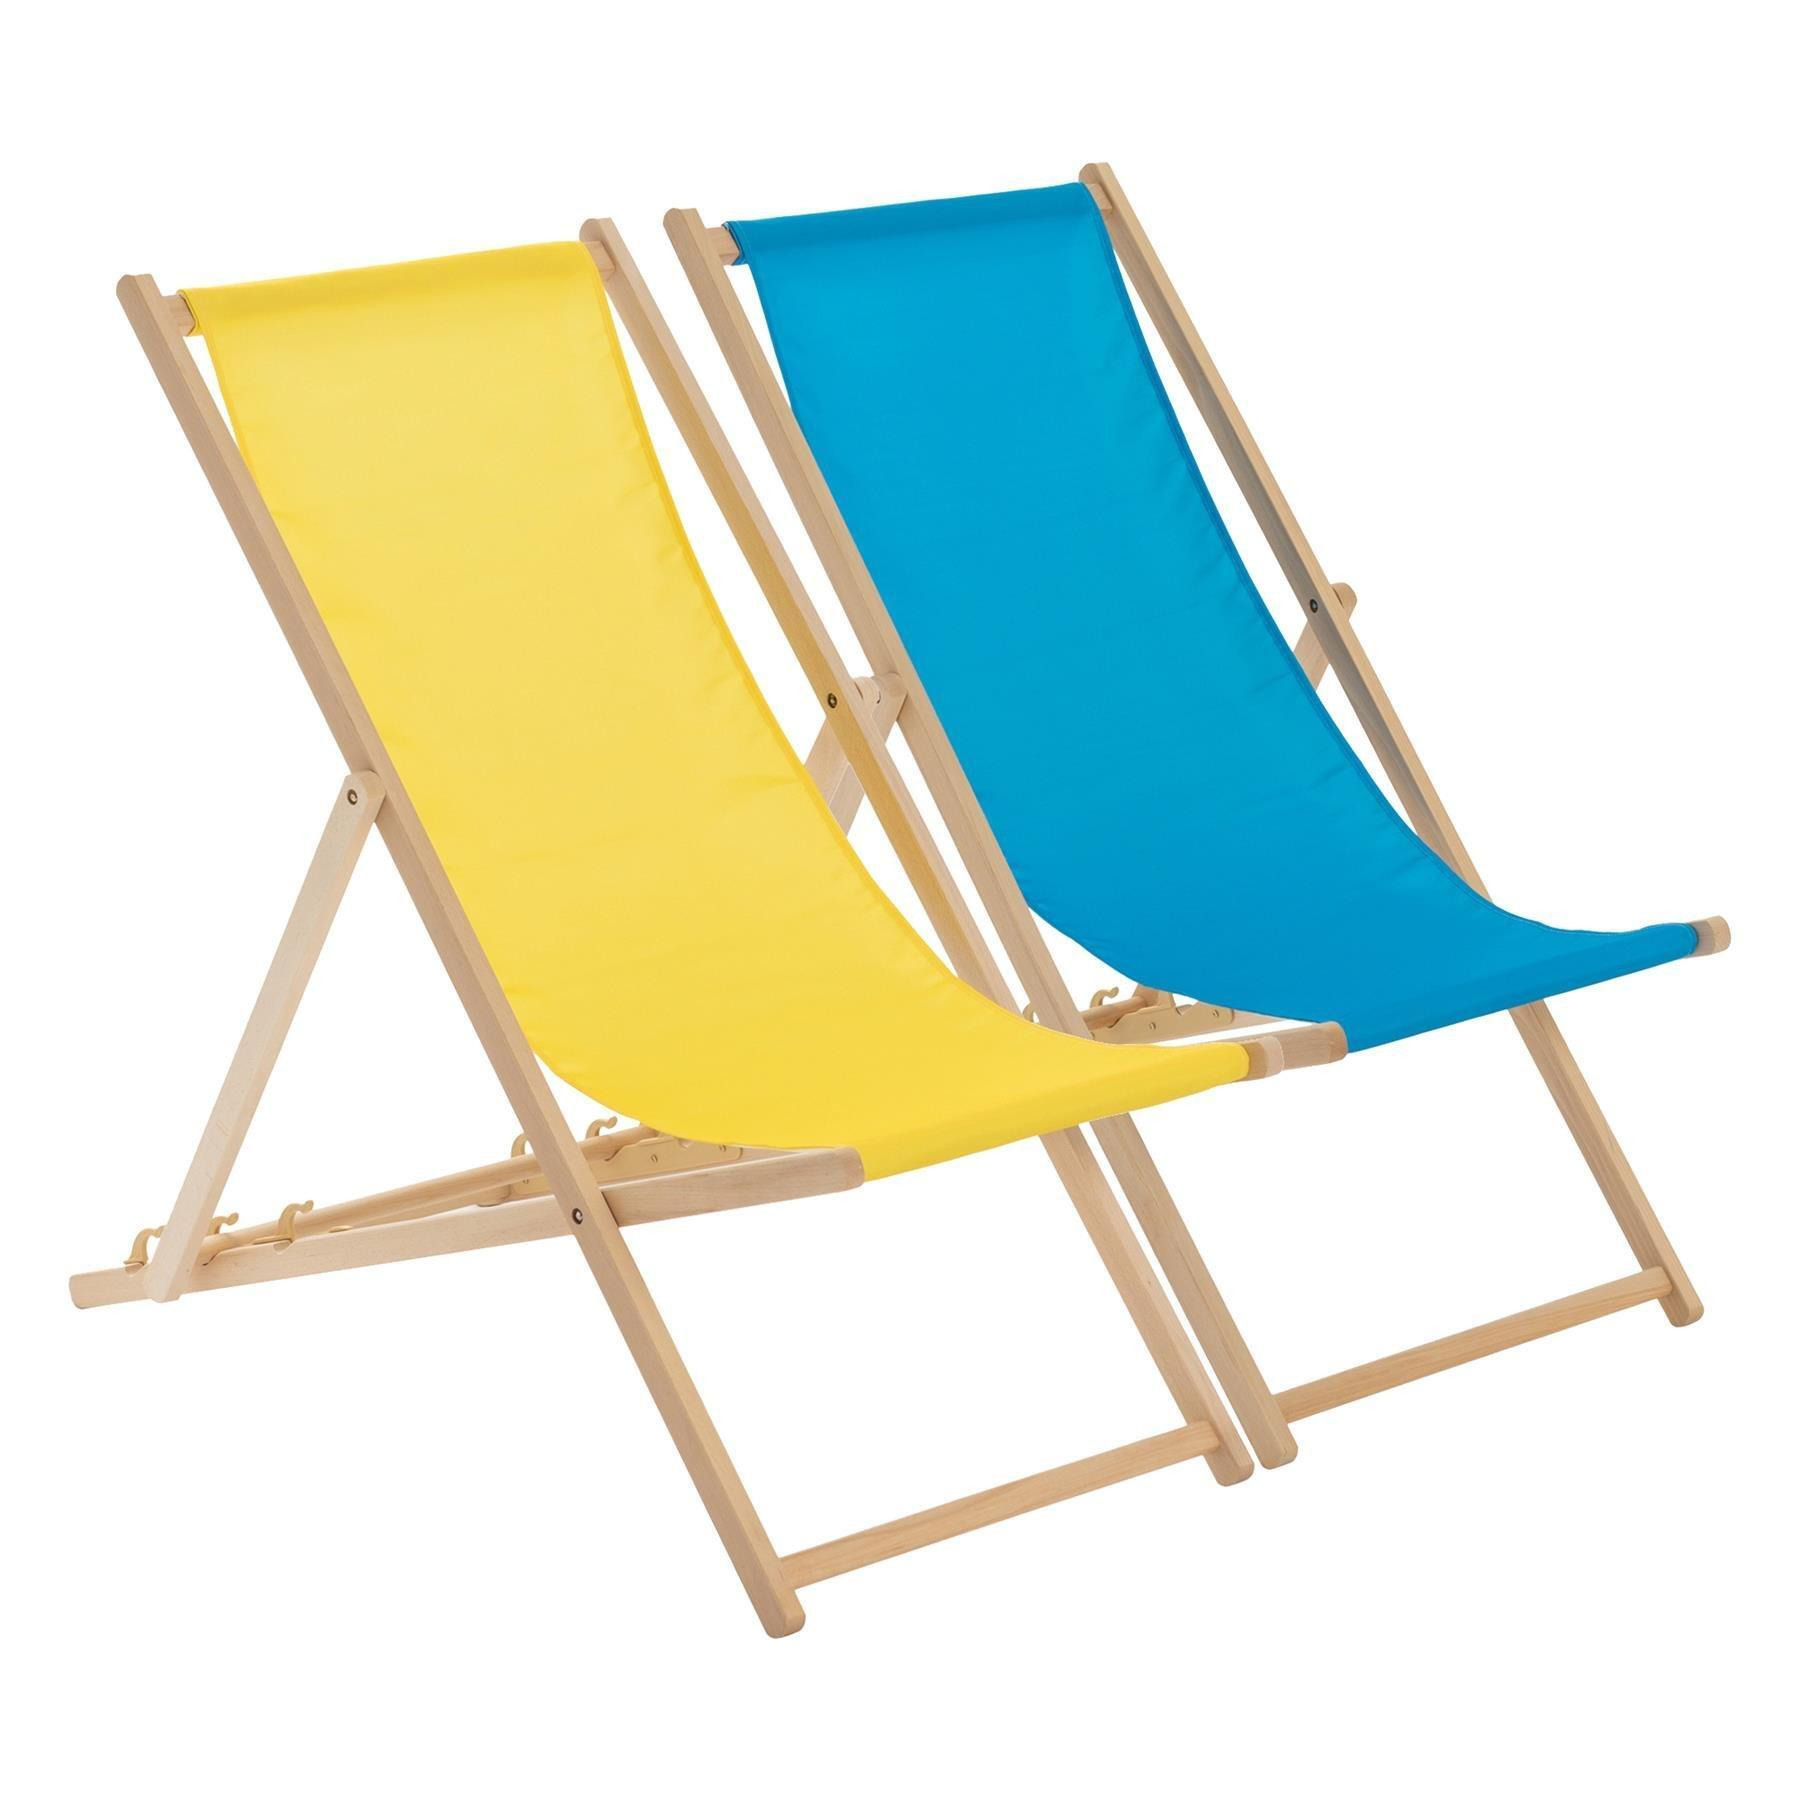 Folding Wooden Deck Chairs Yellow/Light Blue Pack of 2 - image 1